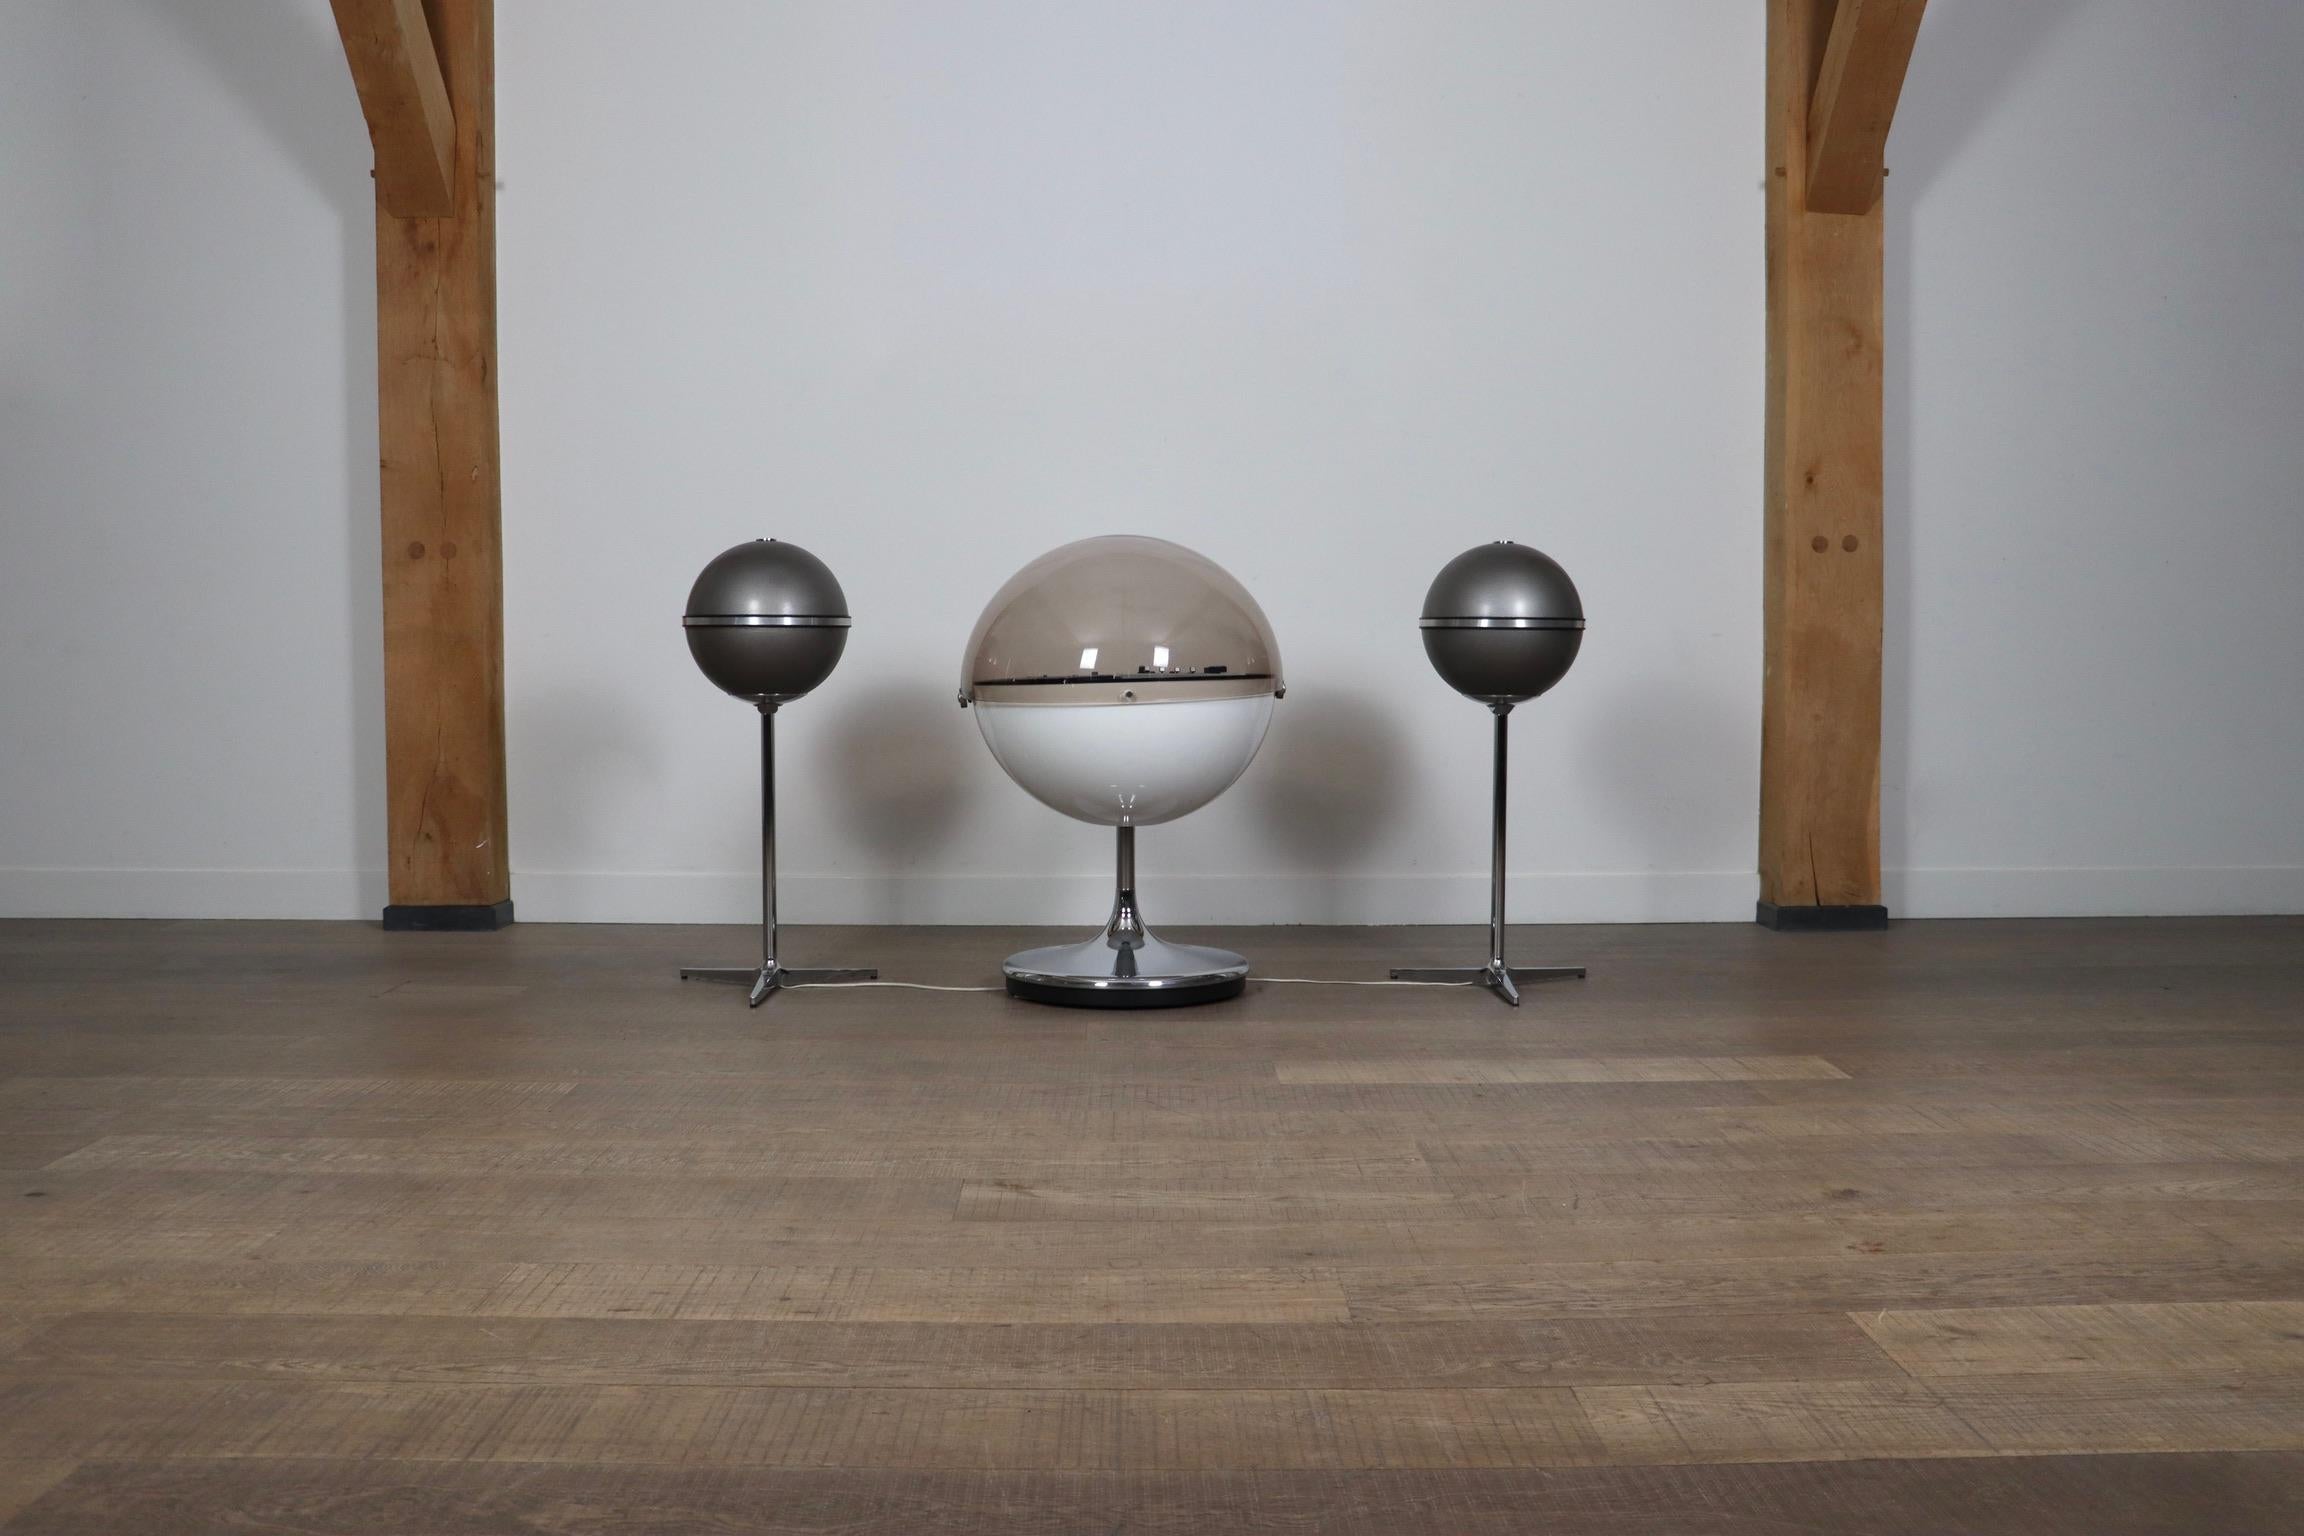 Introducing the incredible Vision 2000 Hi-Fi system by Rosita designed by renowned Thilo Oerke in Germany, 1971.
A true space age icon which fits the design era perfectly. The spherical sound system is based on a chrome tulip base, and combined with